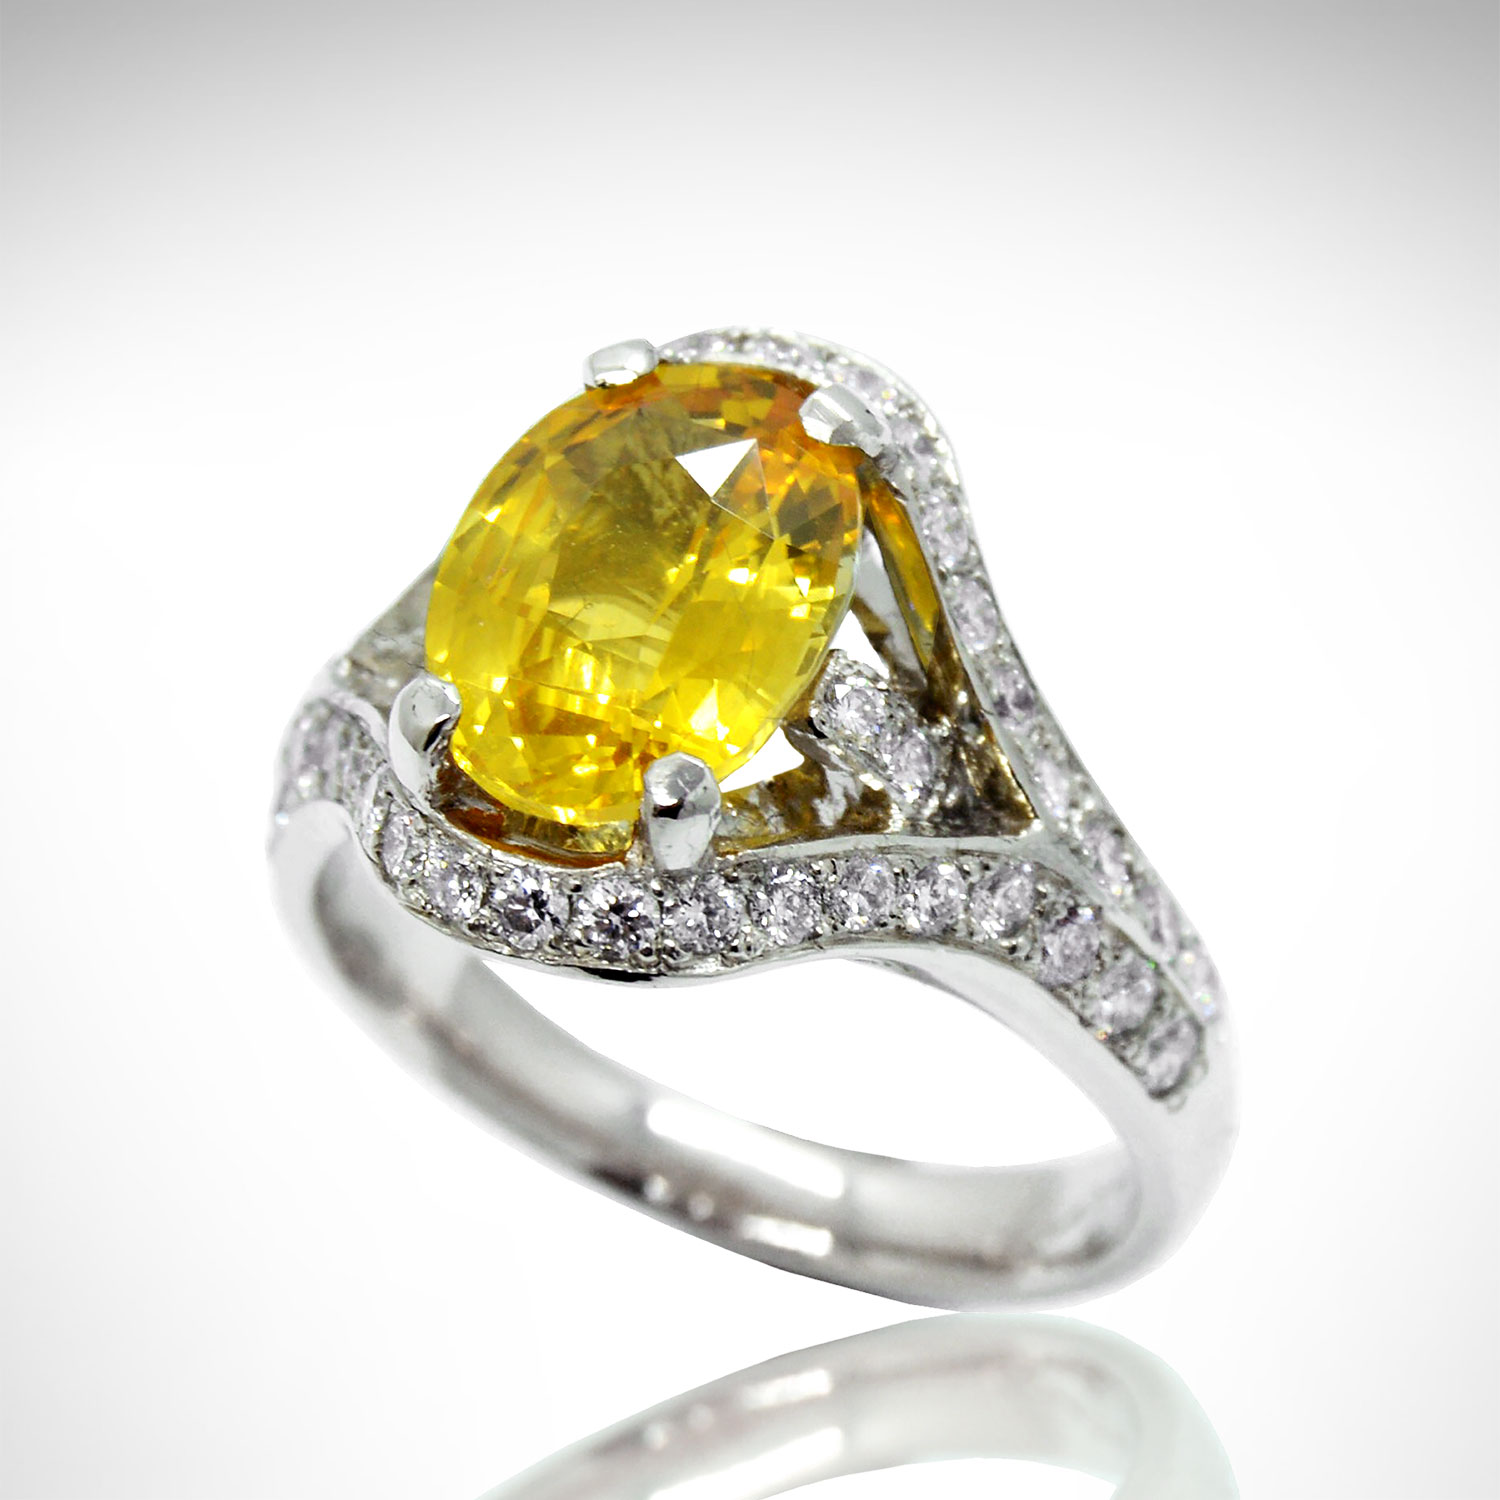 Oval yellow sapphire ring in white gold with pave set diamonds